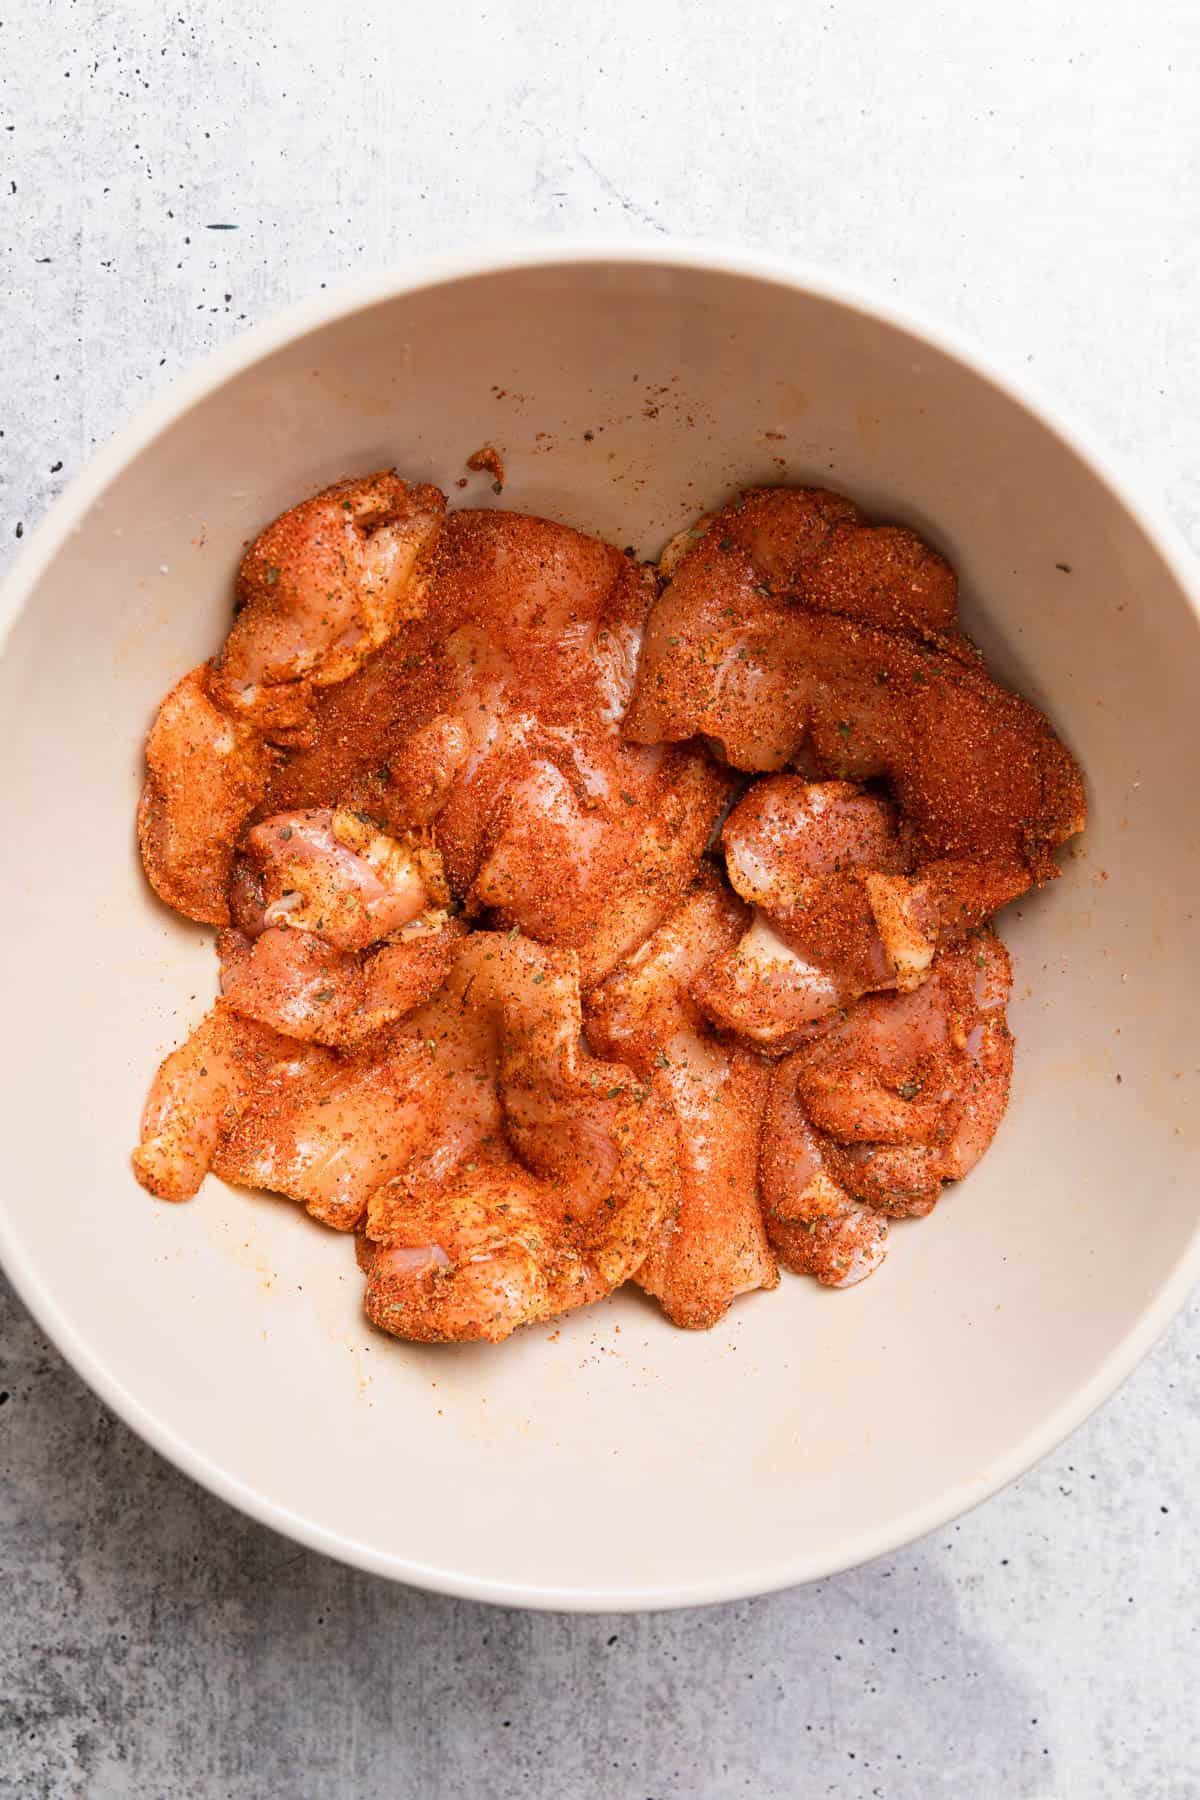 Covering chicken thighs with spice rub.